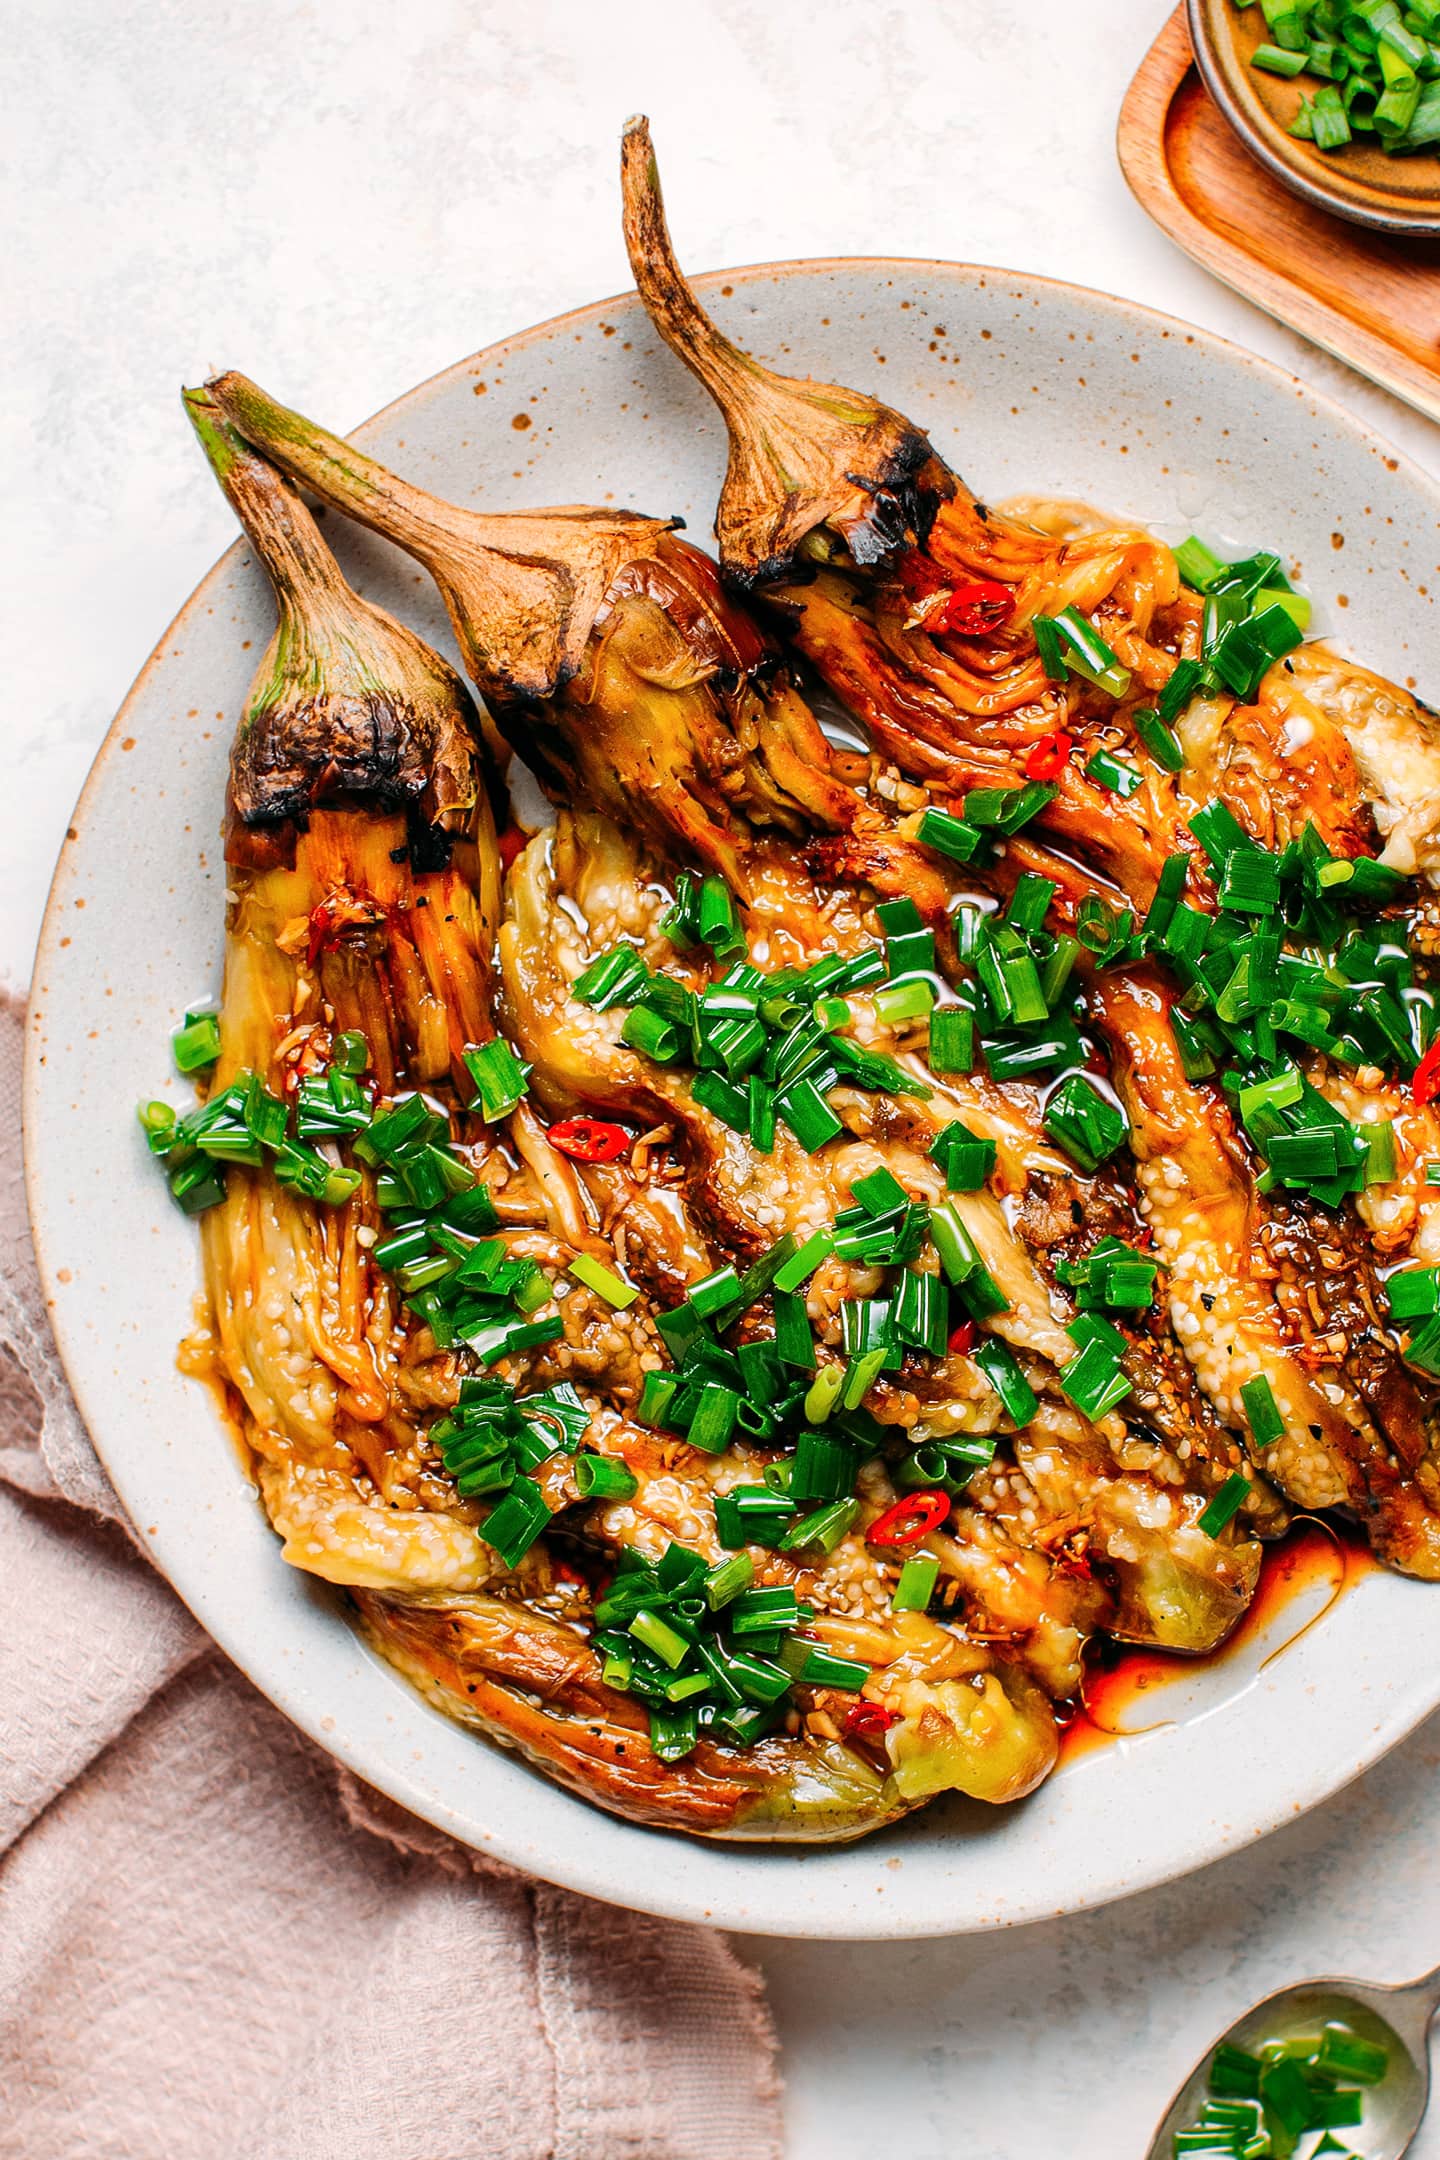 Grilled Eggplant with Green Onions